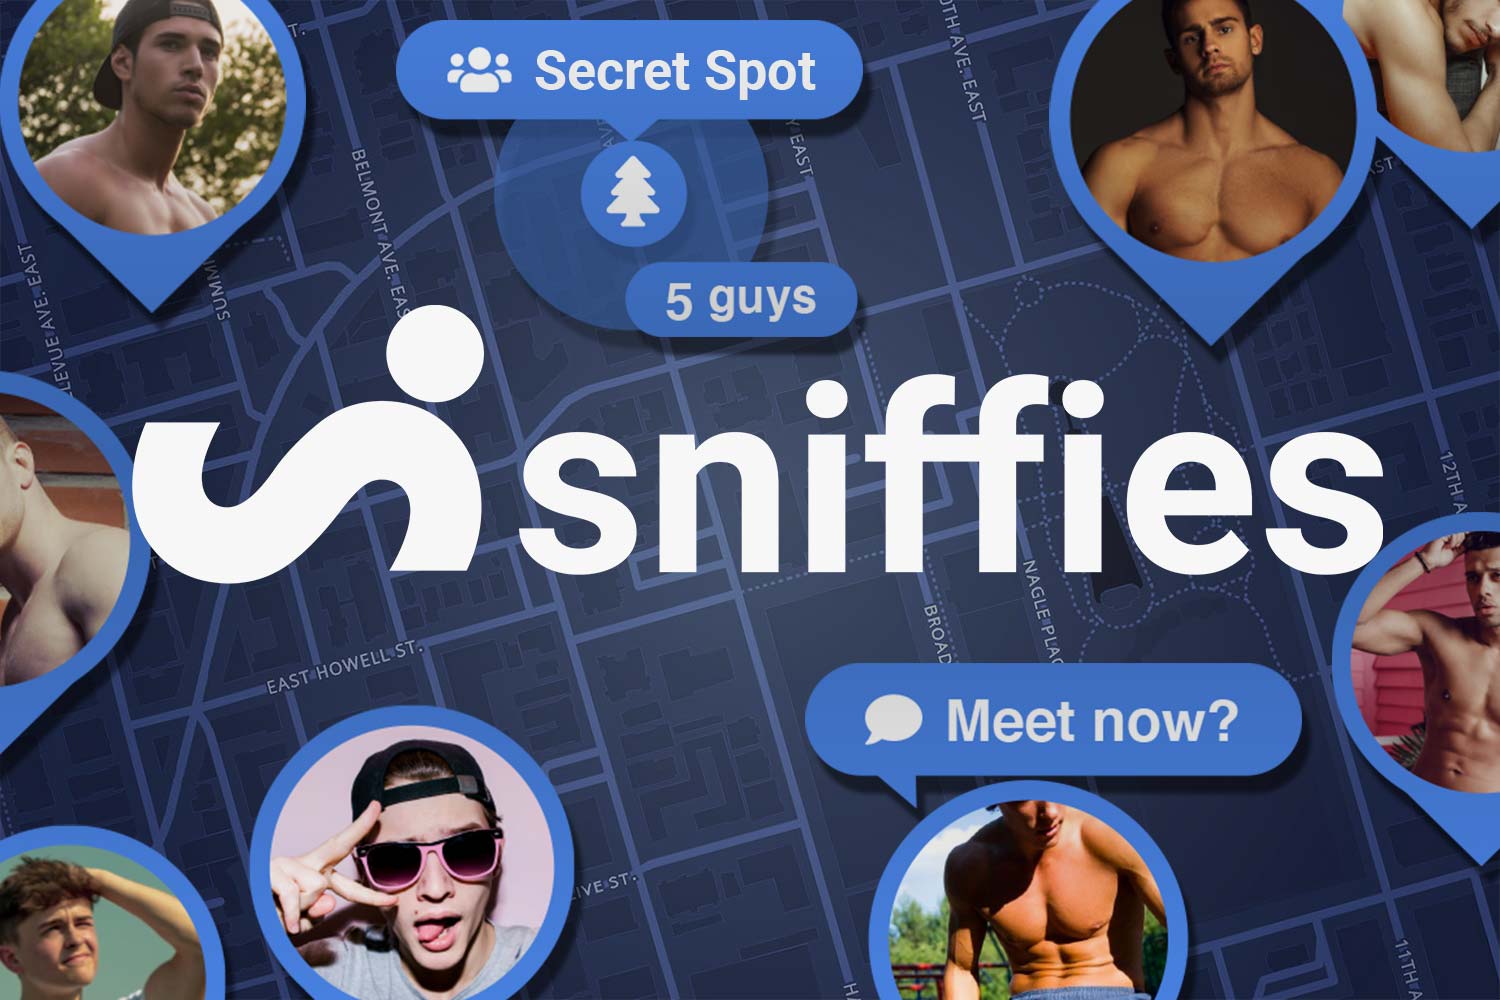 App sniffies Is there